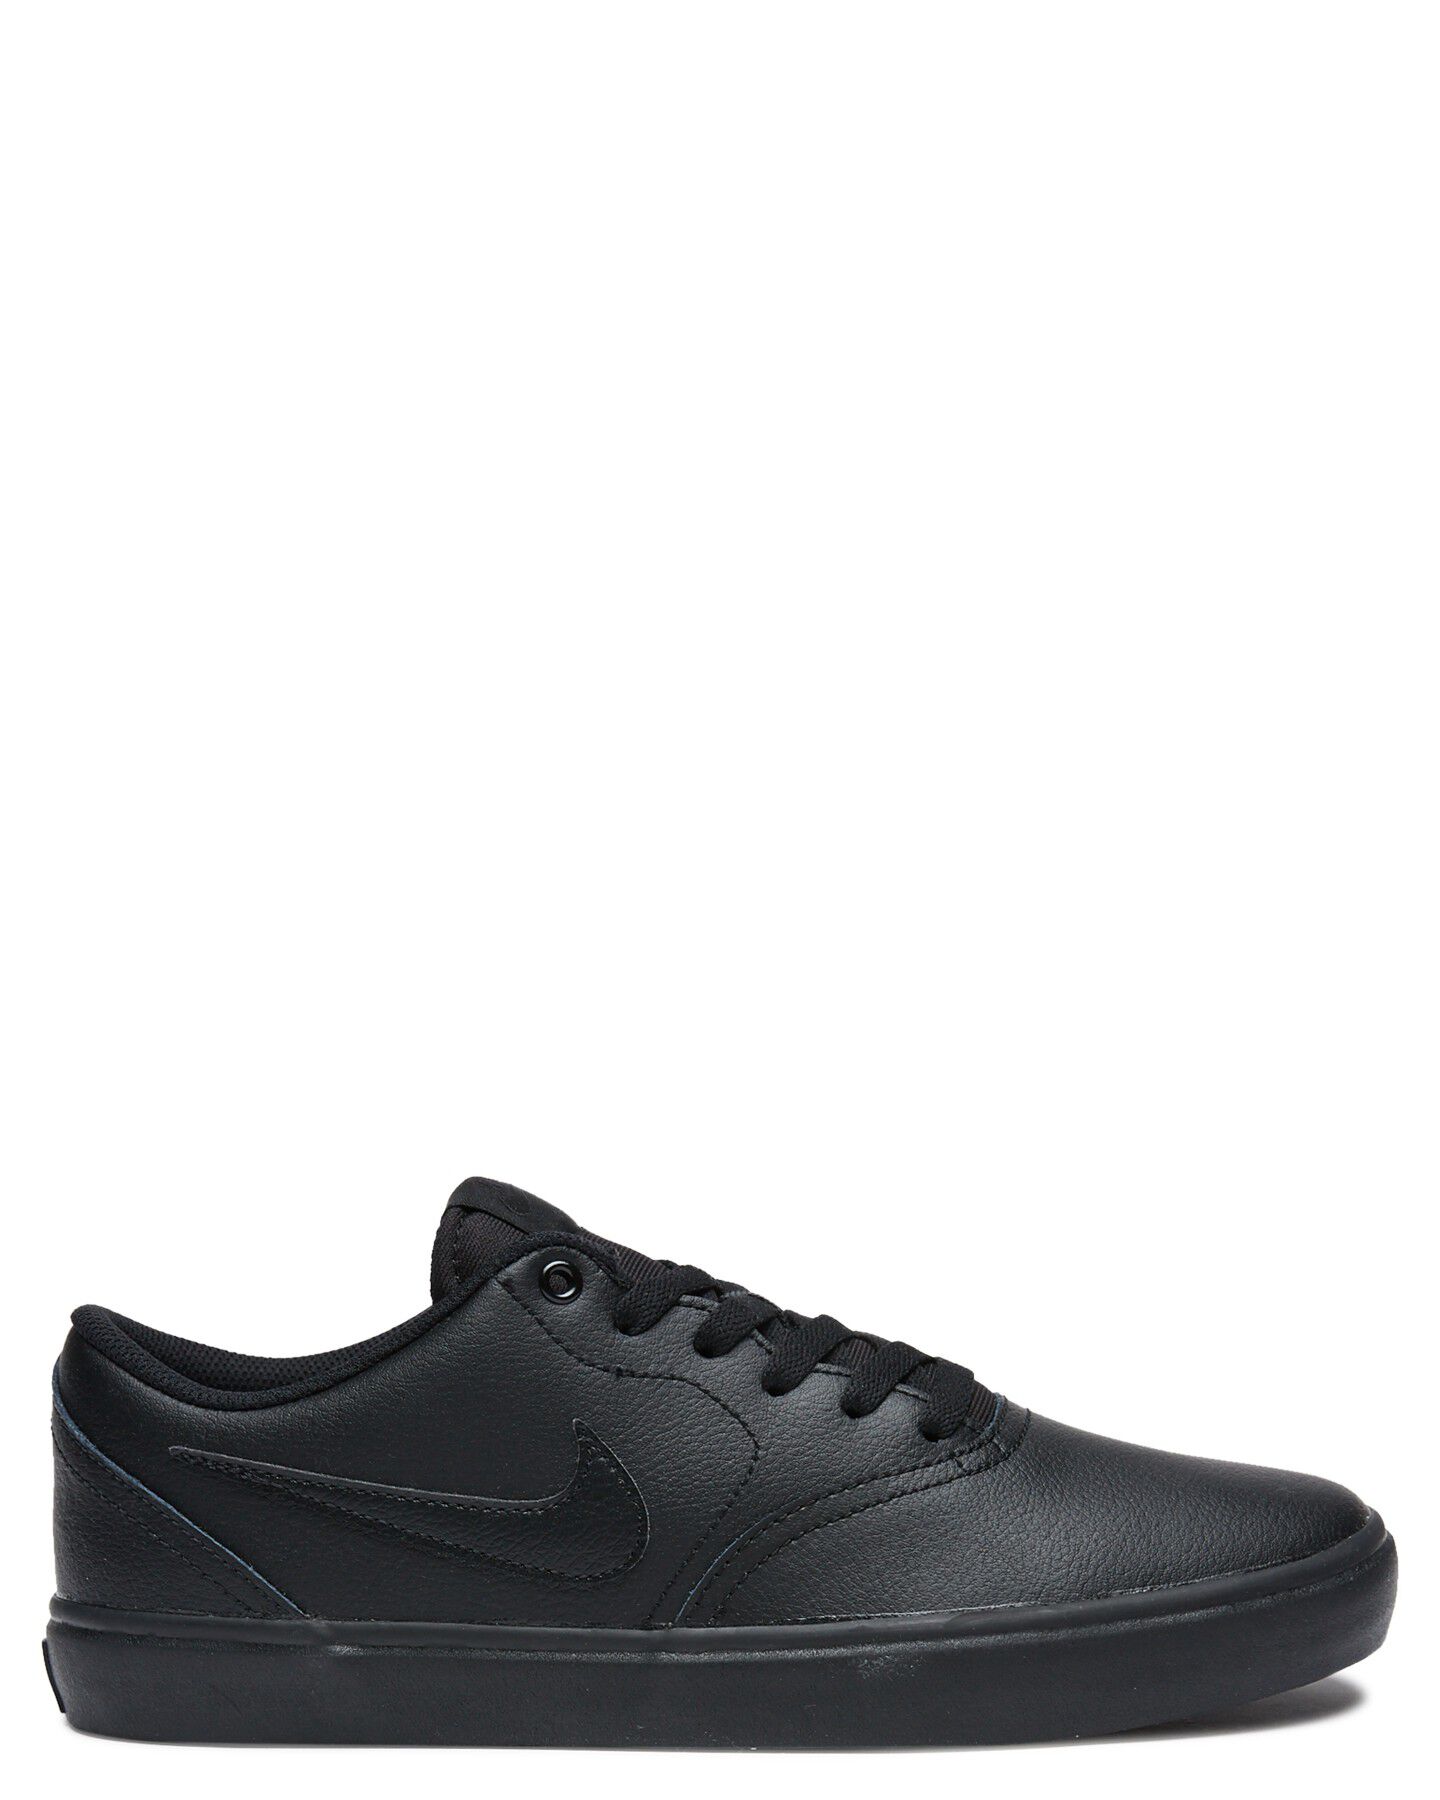 all black nike shoes leather